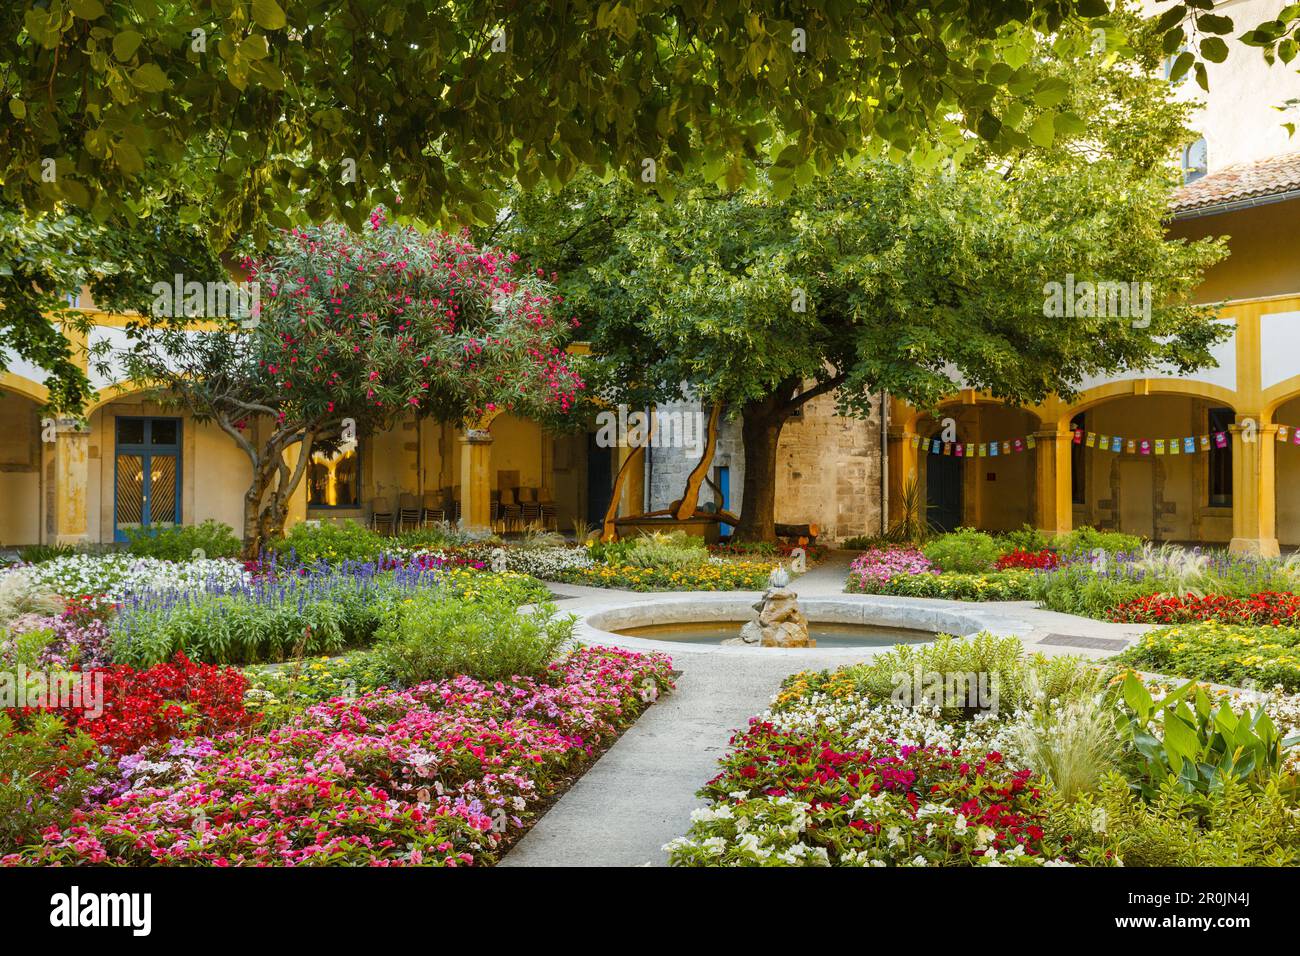 inner courtyard with flowers and fountain, Espace van Gogh, former hospital, image motif of Vincent van Gogh, culture centre, Arles, Bouches-du-Rhone, Stock Photo